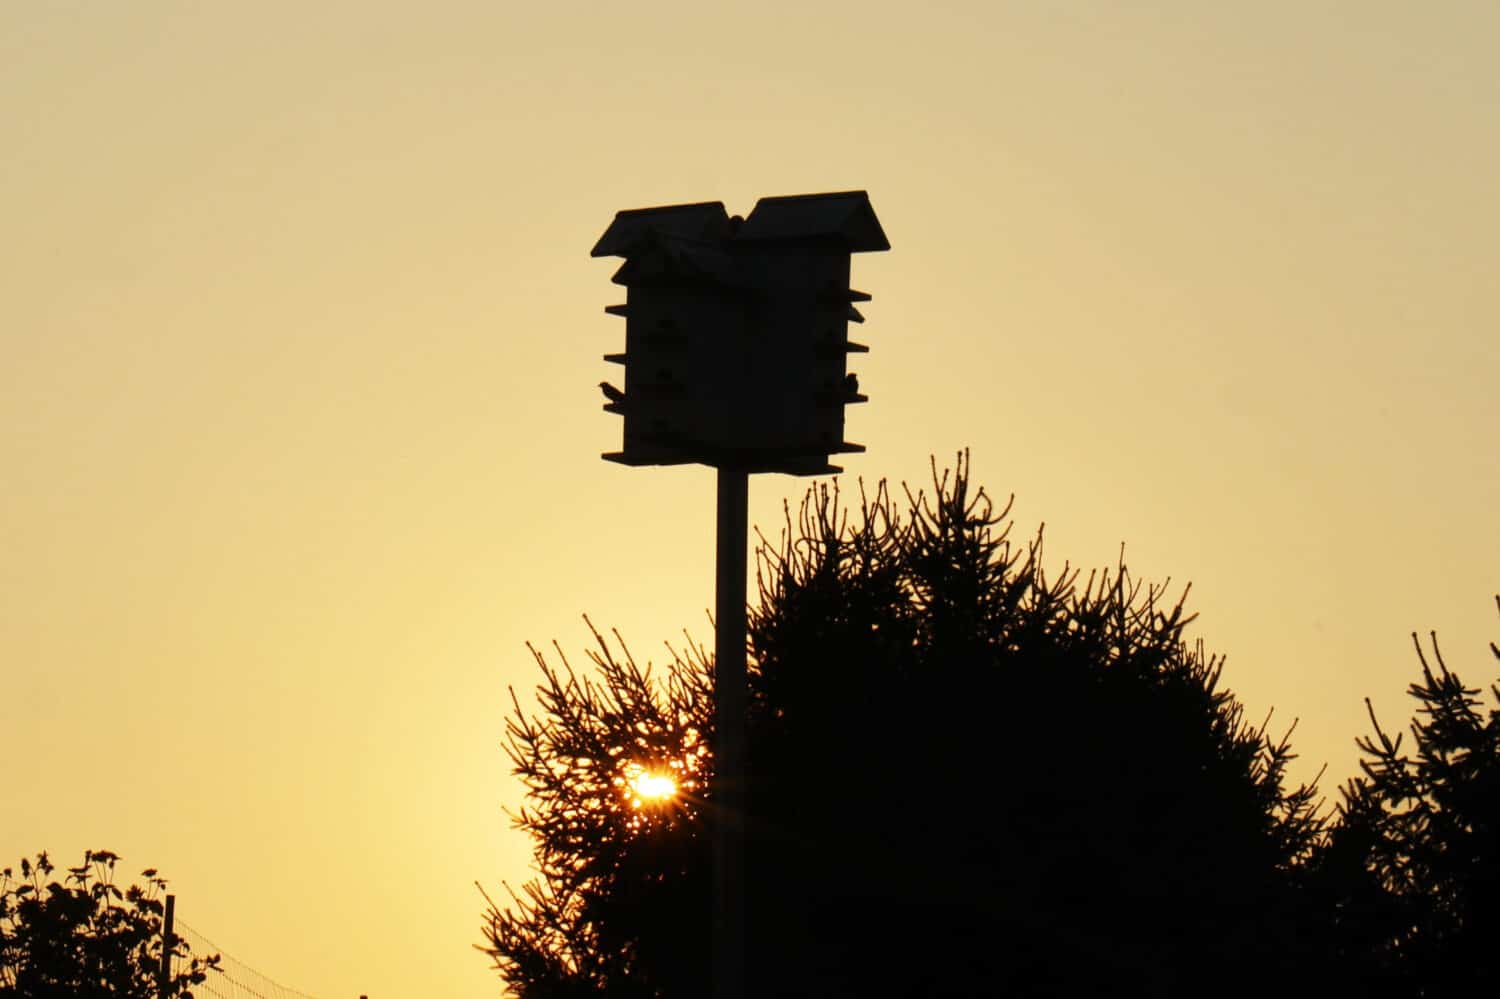 silhouette of Purple Martin house nest nesting boxes on a pole in front of golden sunset sky